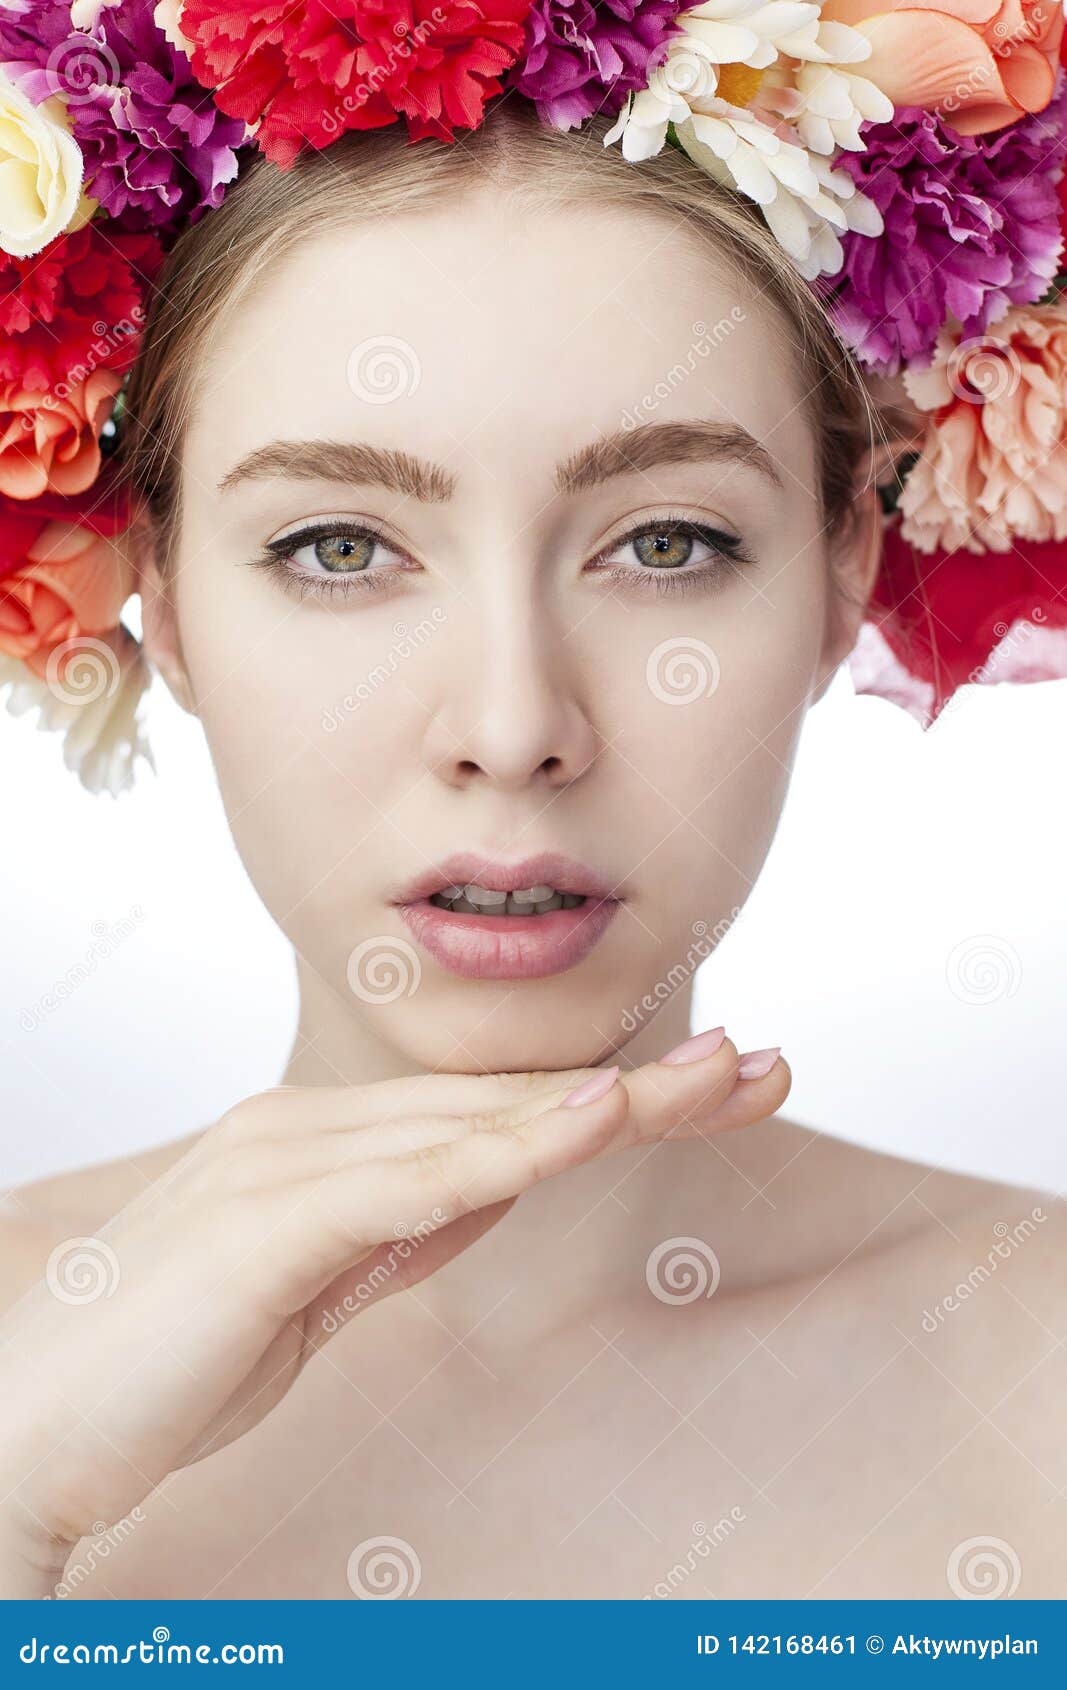 Female Model with Delicacy Beauty. Decorative Garland of Colorful ...